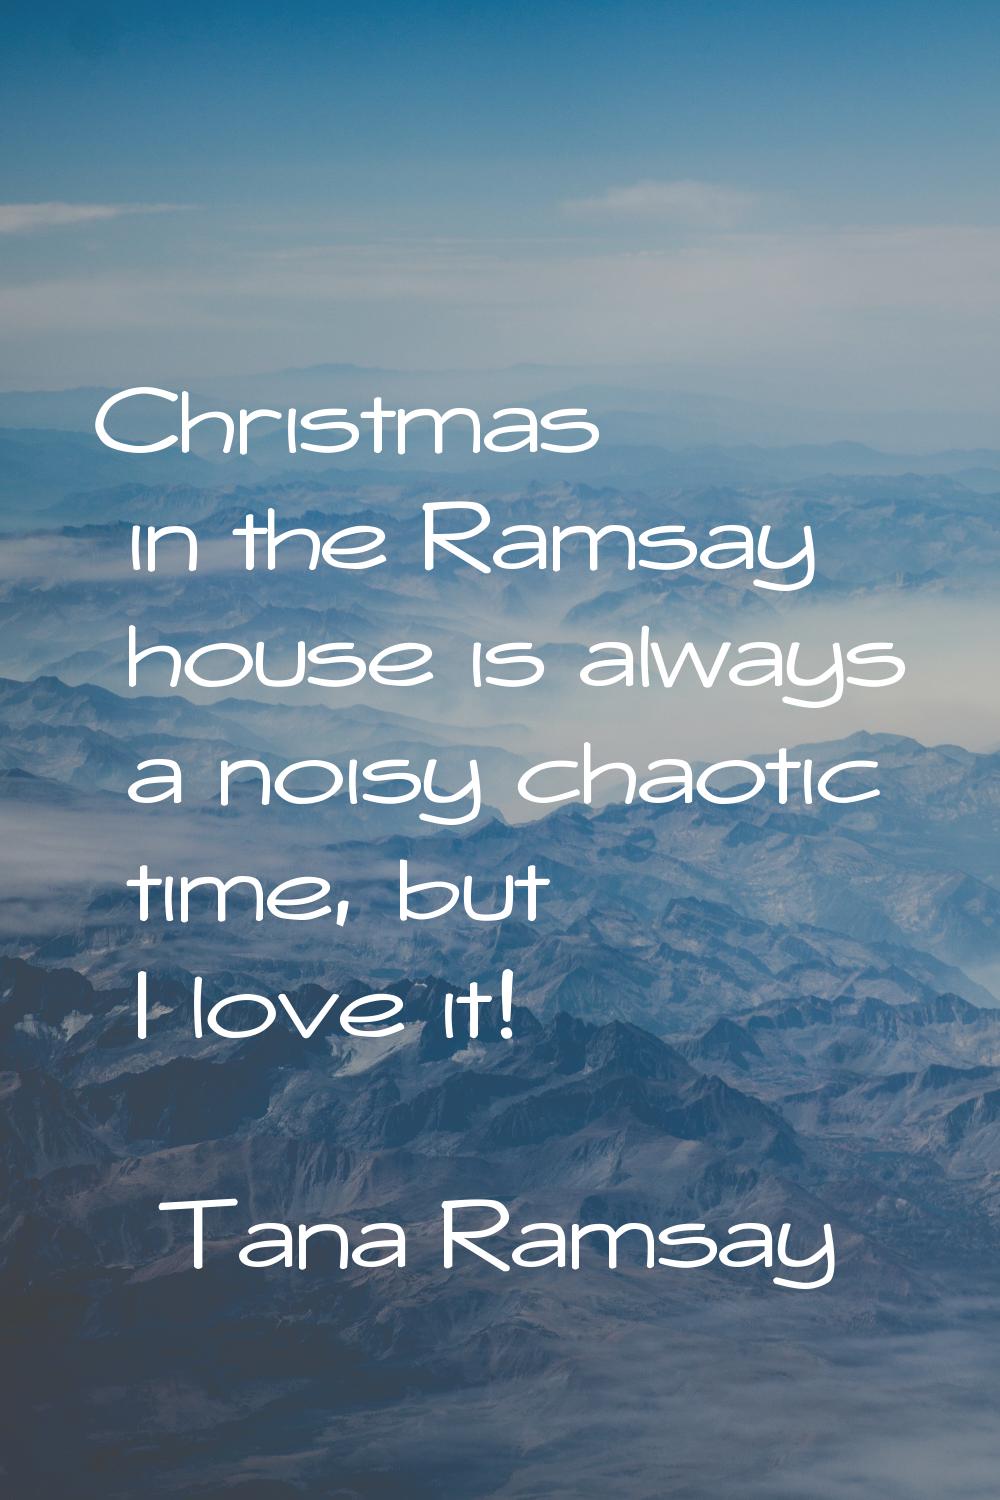 Christmas in the Ramsay house is always a noisy chaotic time, but I love it!